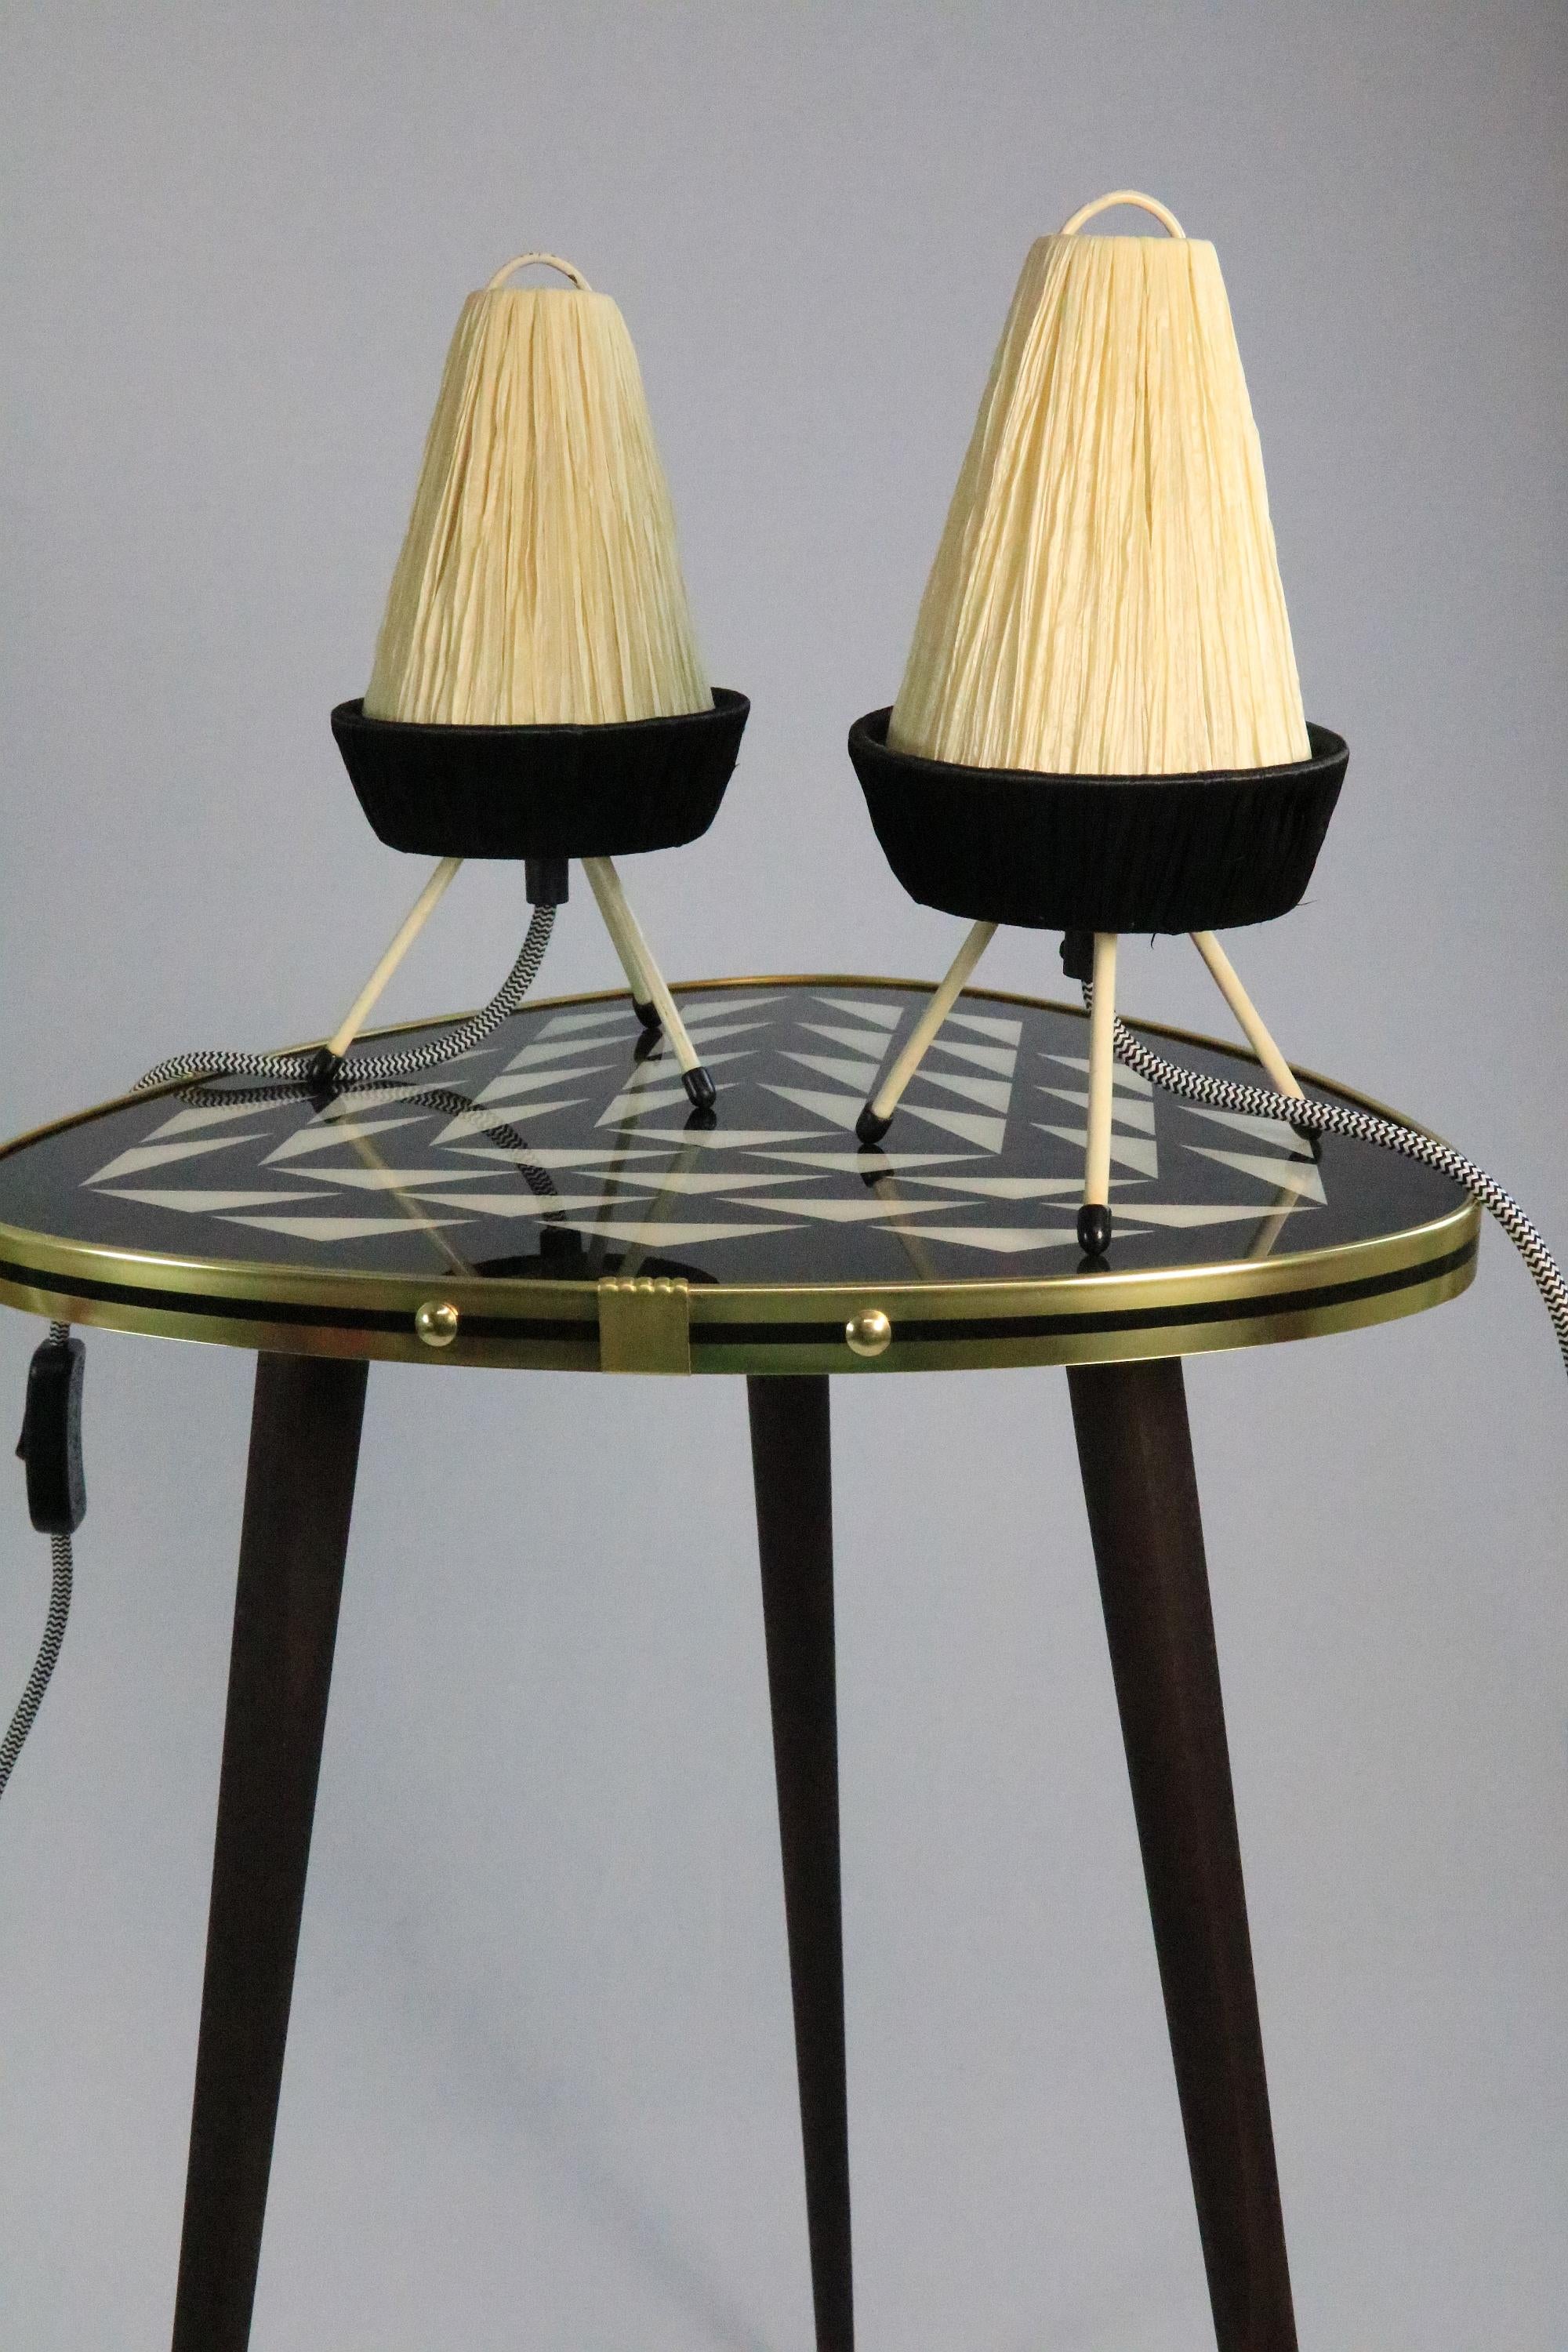 Set of 2 Filigree Table Lamps, Raffia Shade, Germany, Tripod, 1950s For Sale 4